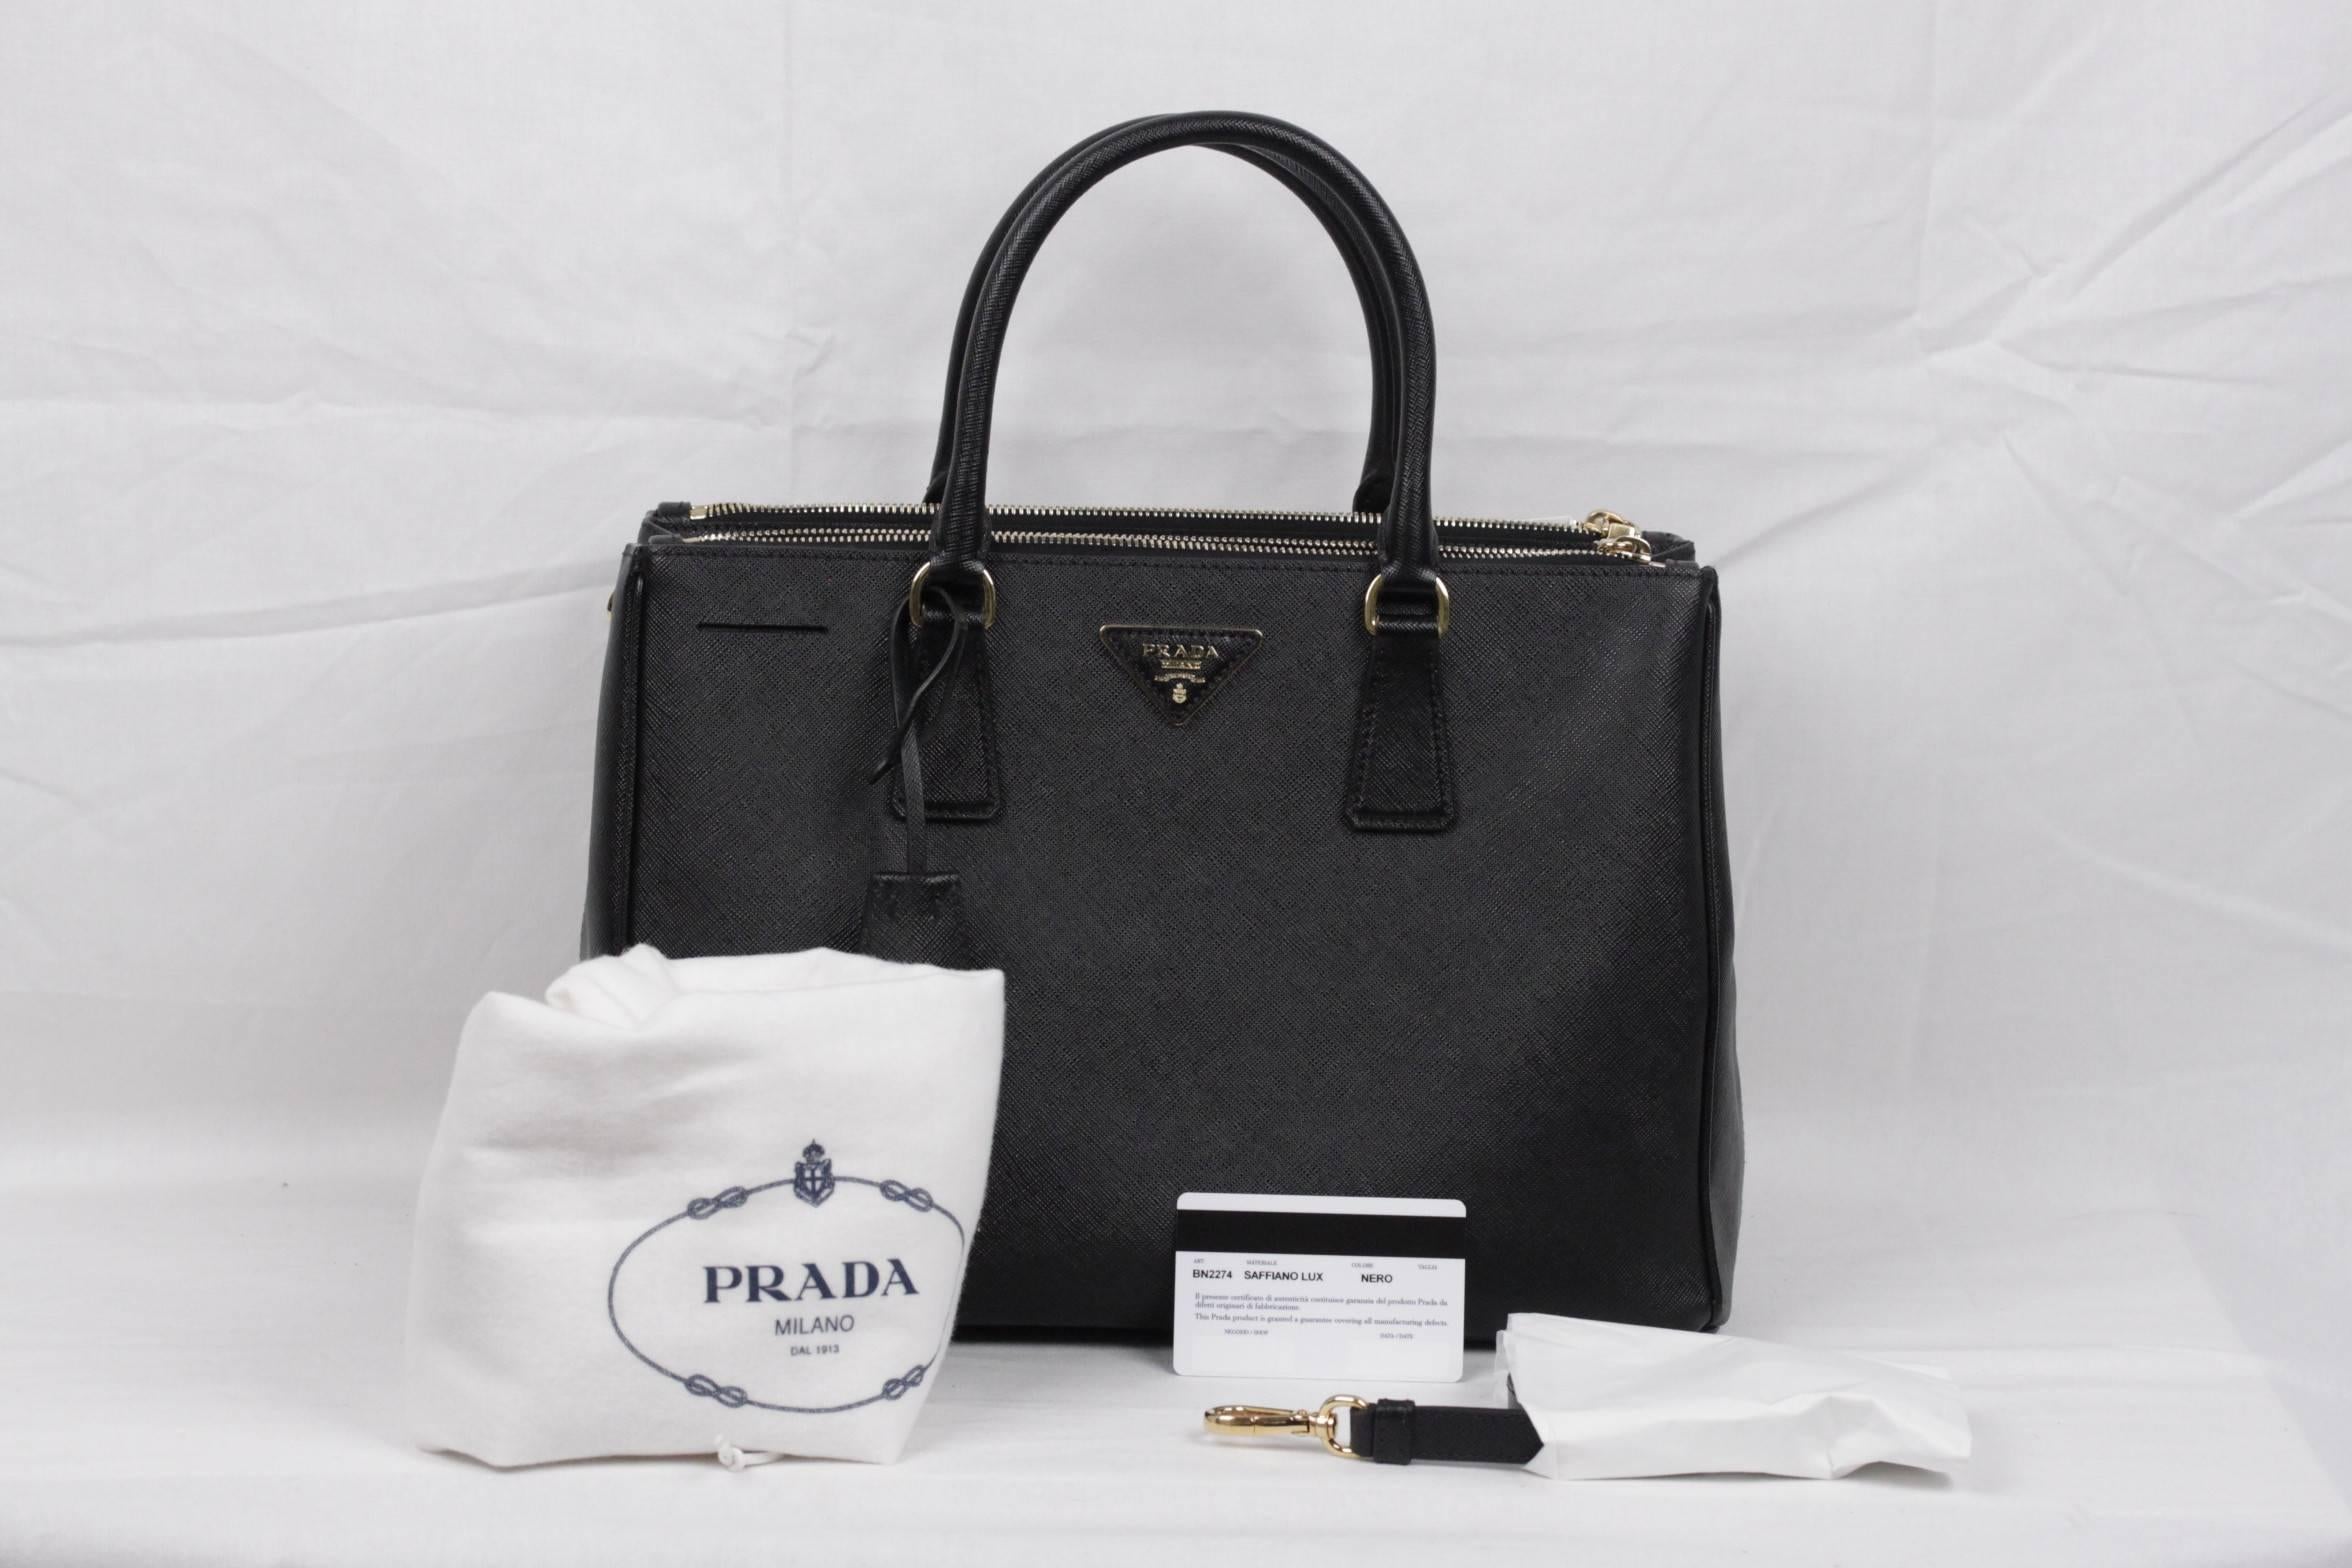  Stunning PRADA top handles bag/handbag mod. BN2274, designed in black Saffiano Lux leather and finished with gold metal logo lettering on the front, all in a structured tote silhouette. It features a removable keychain with leather clochette,